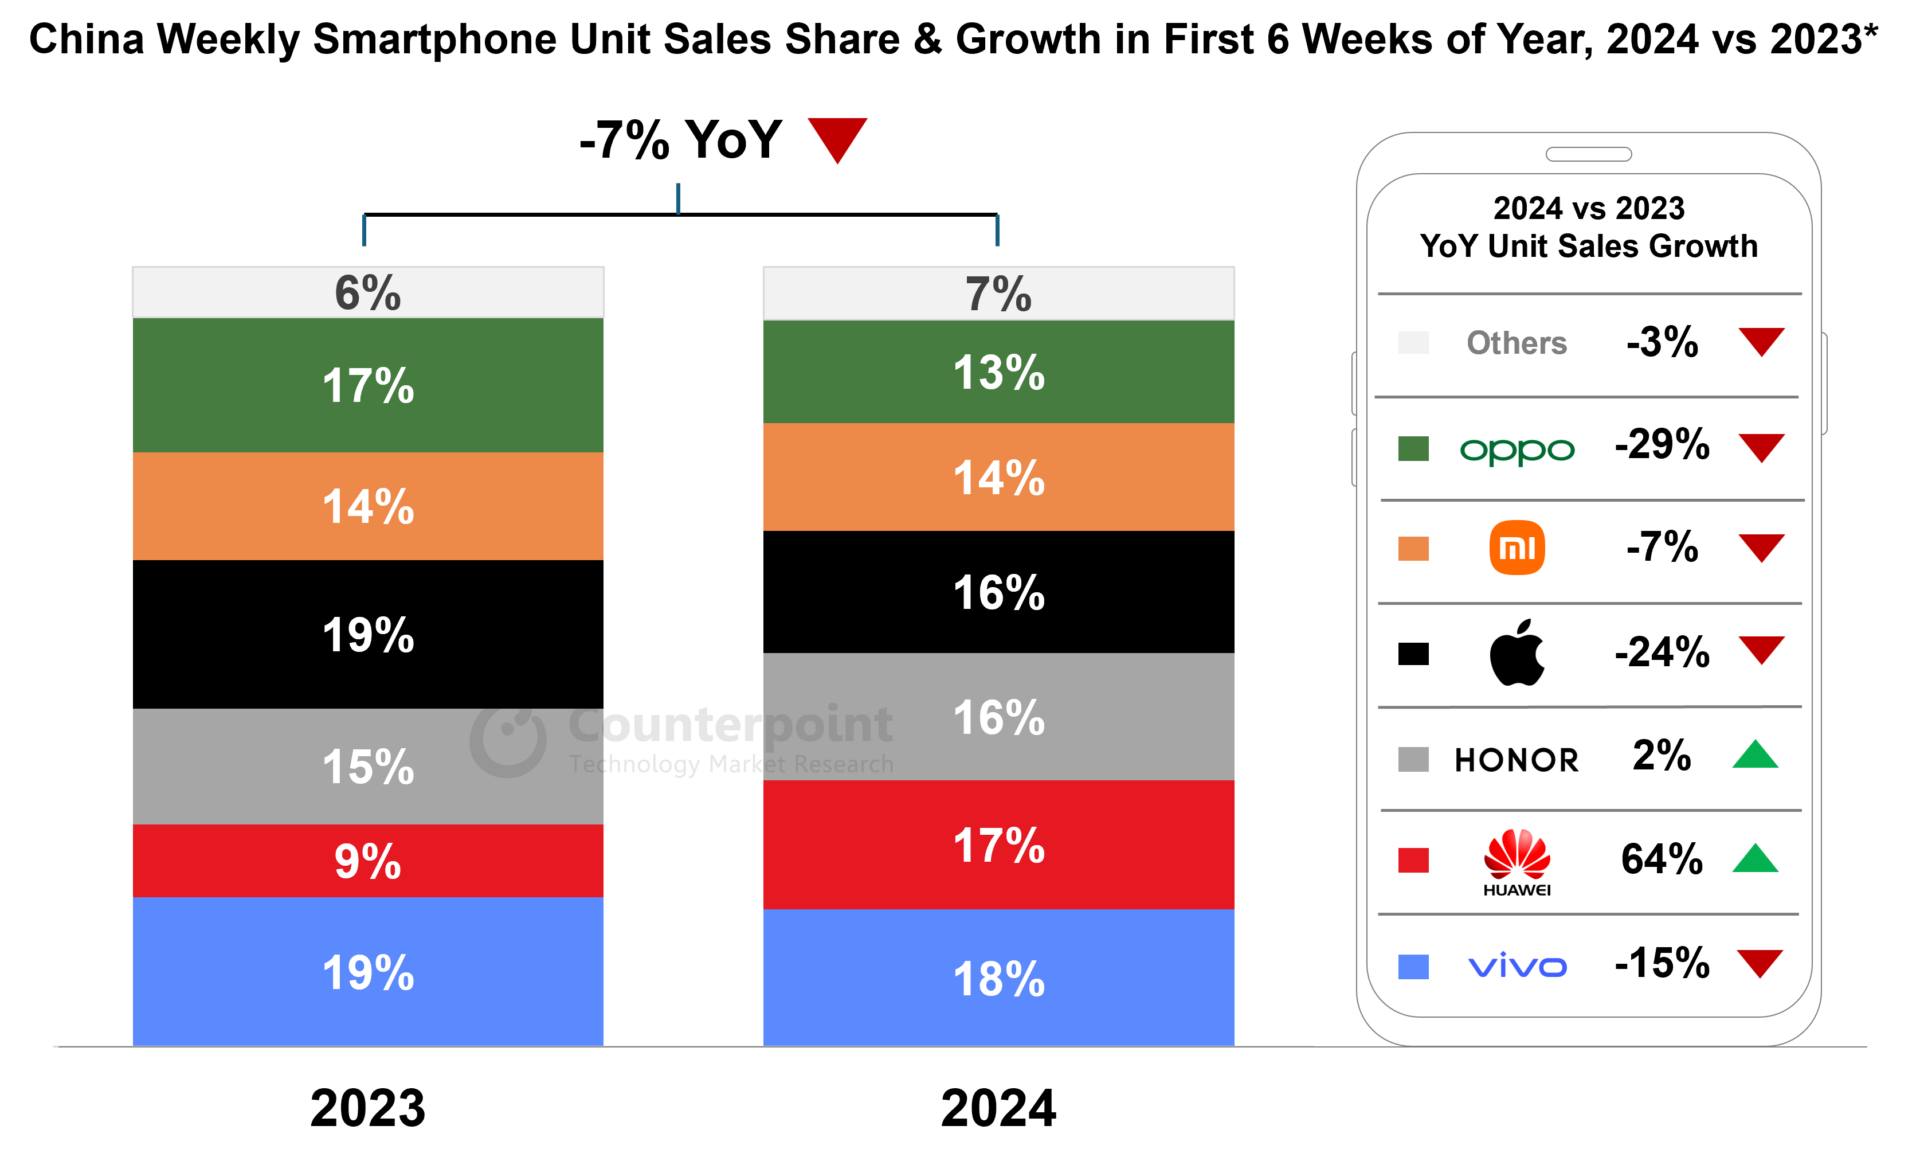 China-Weekly-Smartphone-Unit-Sales-Share-Growth-in-First-6-Weeks-of-Year-2024-vs-2023.png